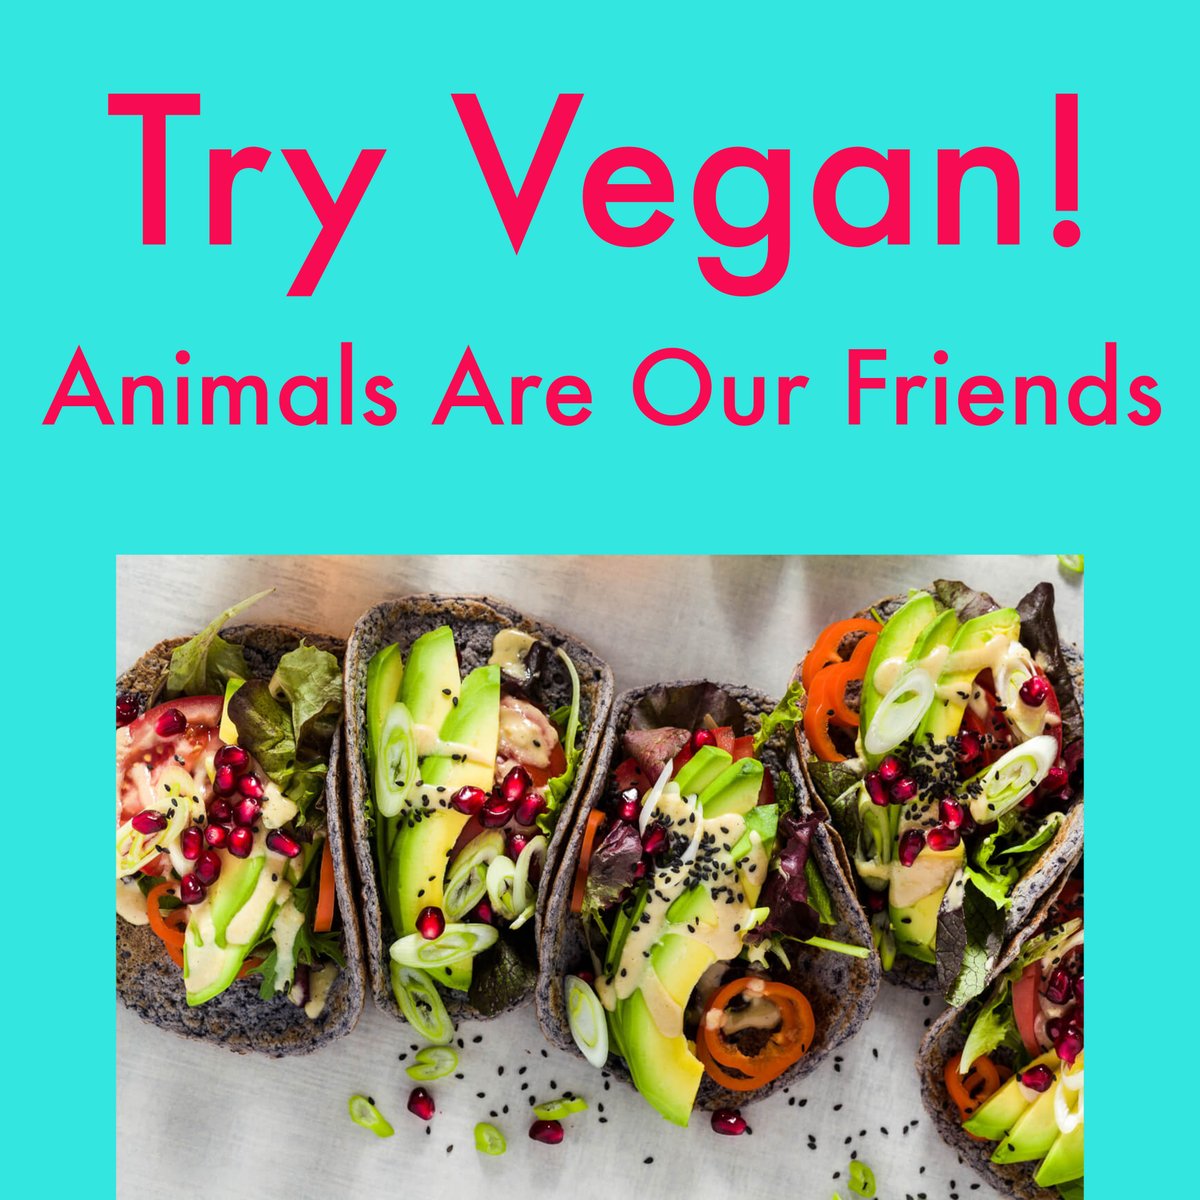 TACOS are yum! Try VEGAN!!!! Animals are our FRIENDS 💜💜💜💜 #vegan #GoVegan #tacos #animalsarefriends #friends #GM #veganlifestyle #VeganForTheAnimals #life #lifestyle #tryvegan